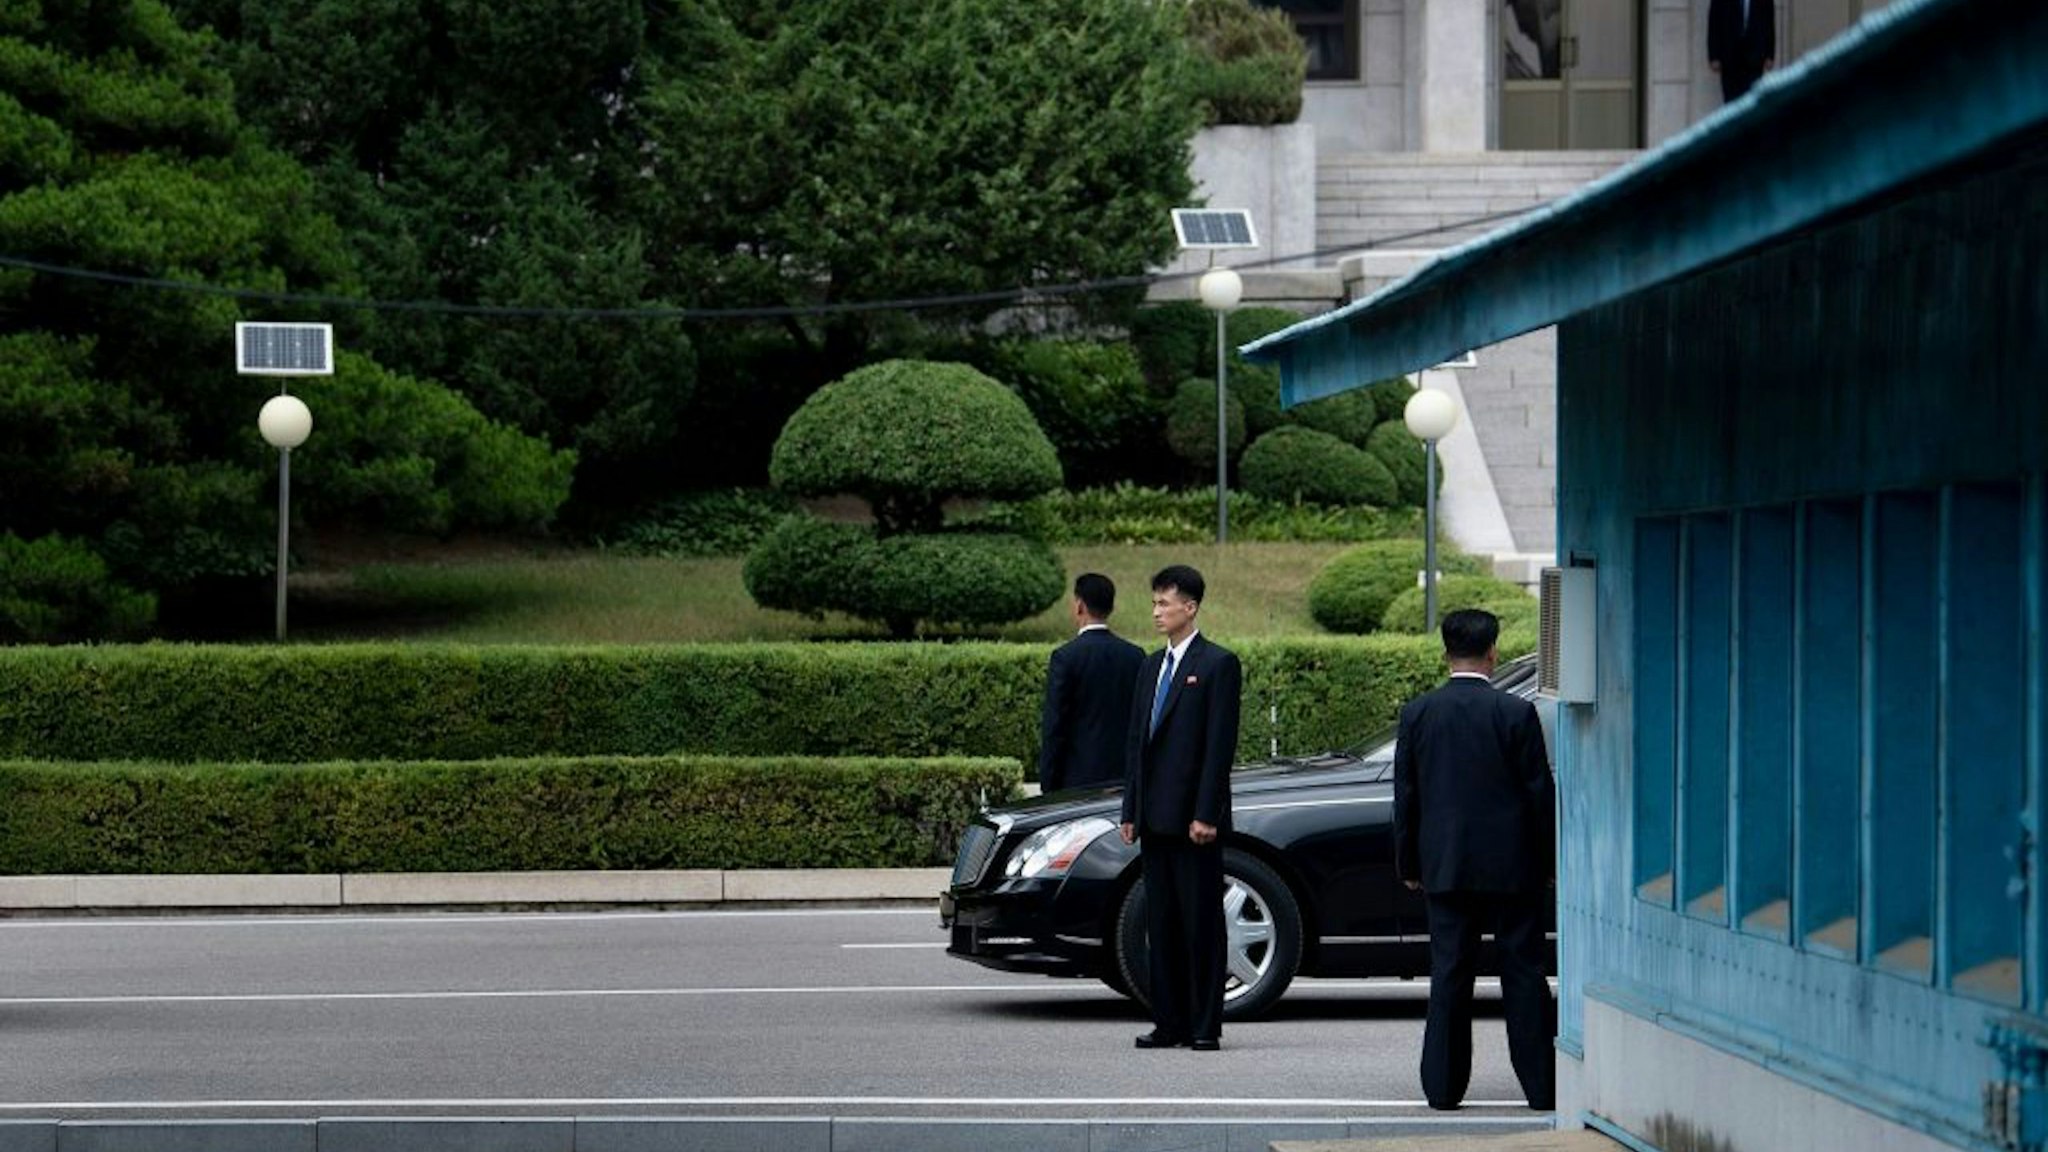 Members of North Korean security stands guard near a North Korean motorcade while US President Donald Trump and North Korea's leader Kim Jong-un meet in the Demilitarized Zone(DMZ) on June 30, 2019.